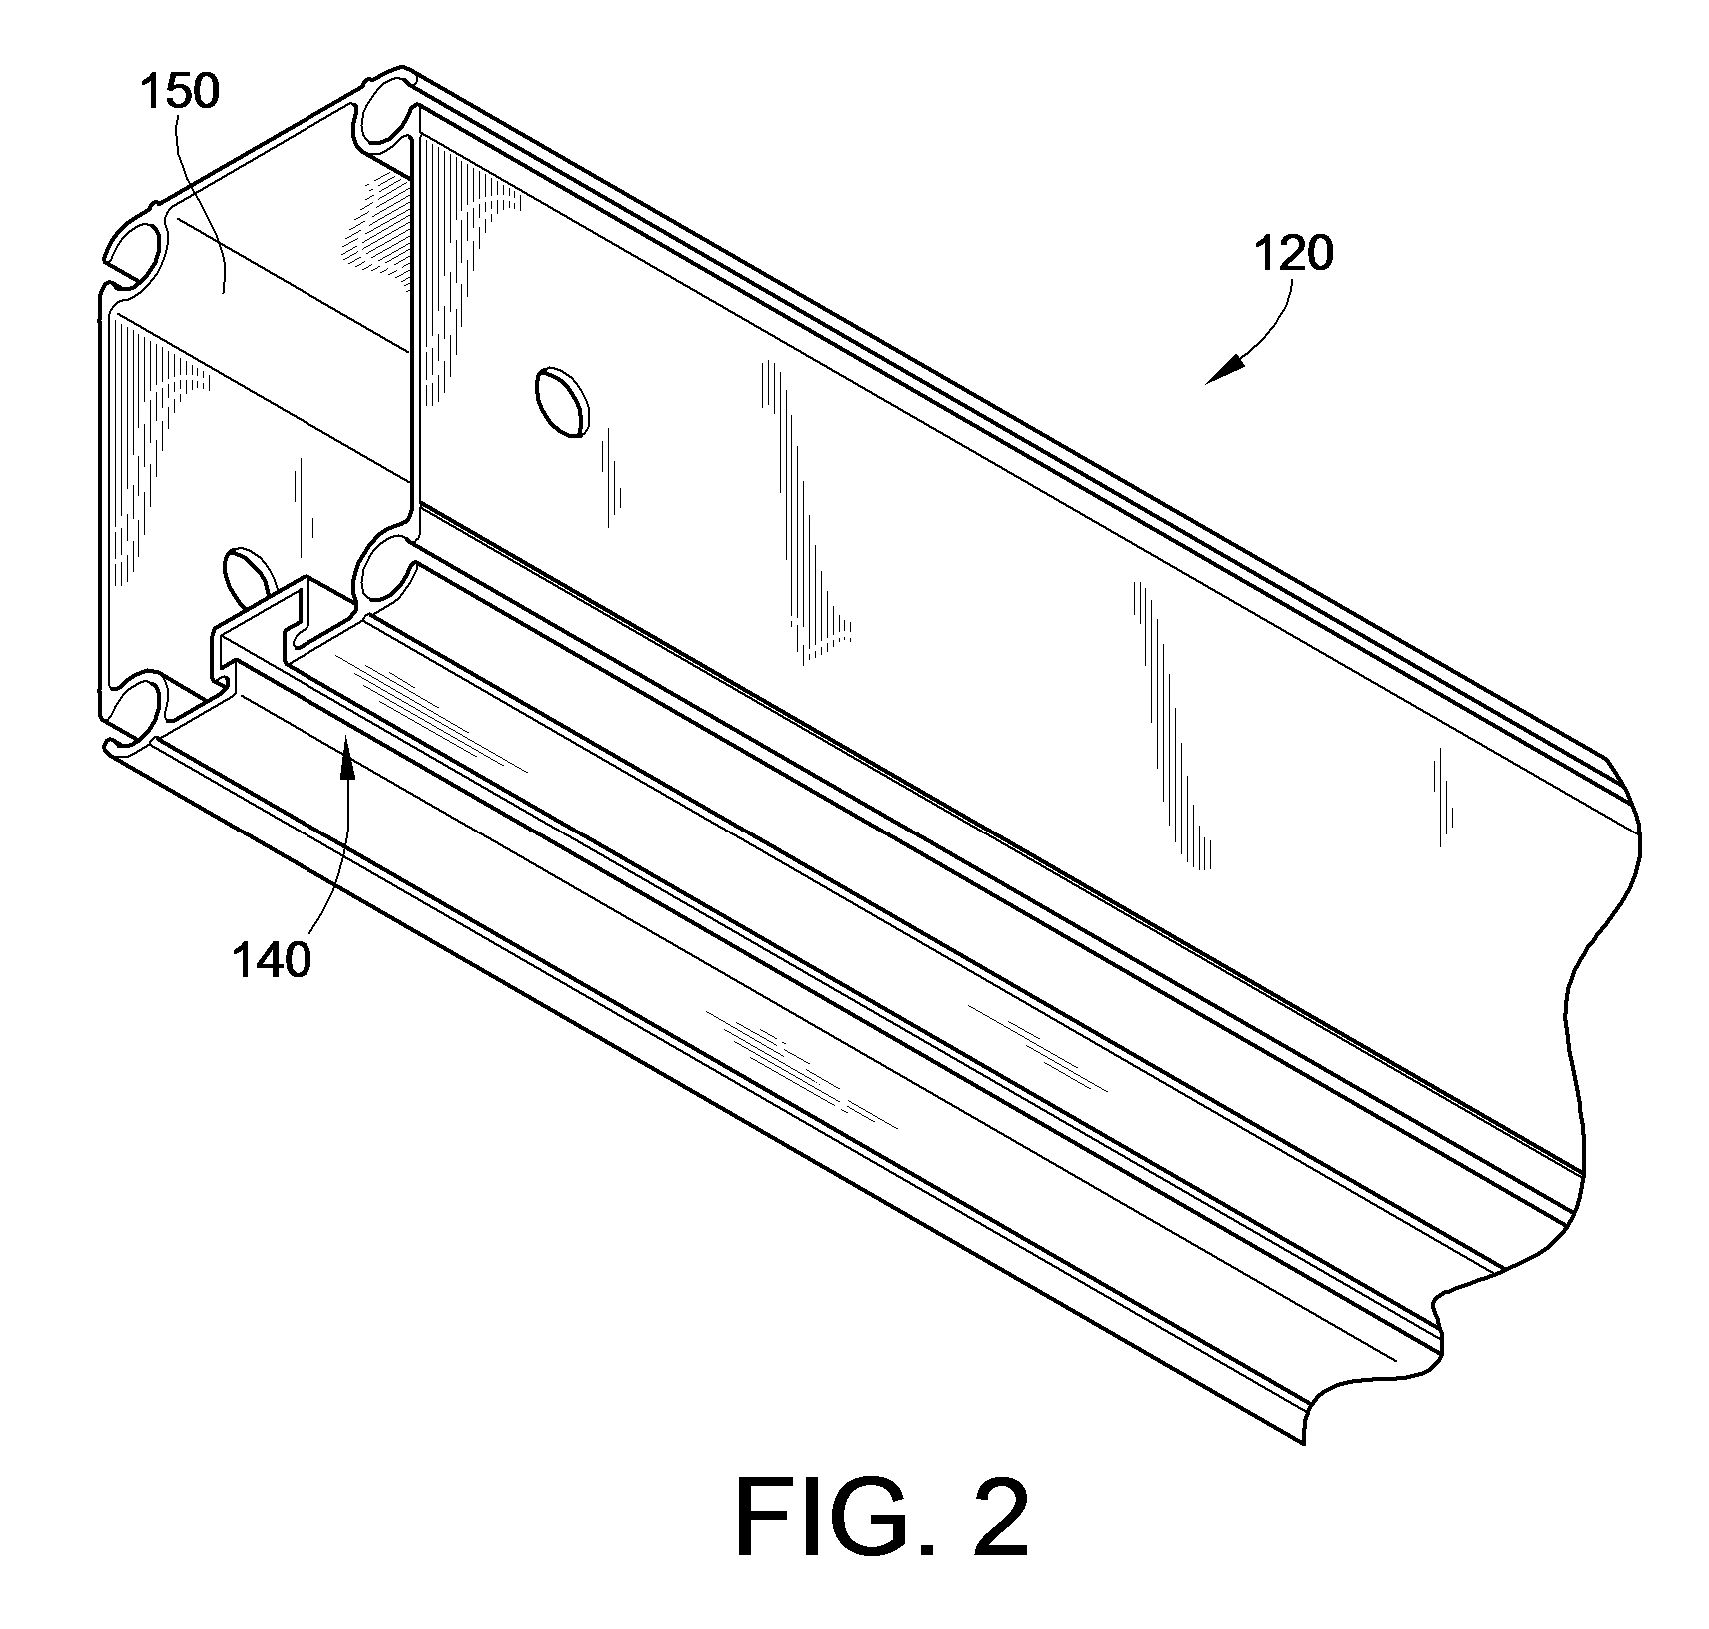 Tent rafter end cap and tent incorporating same